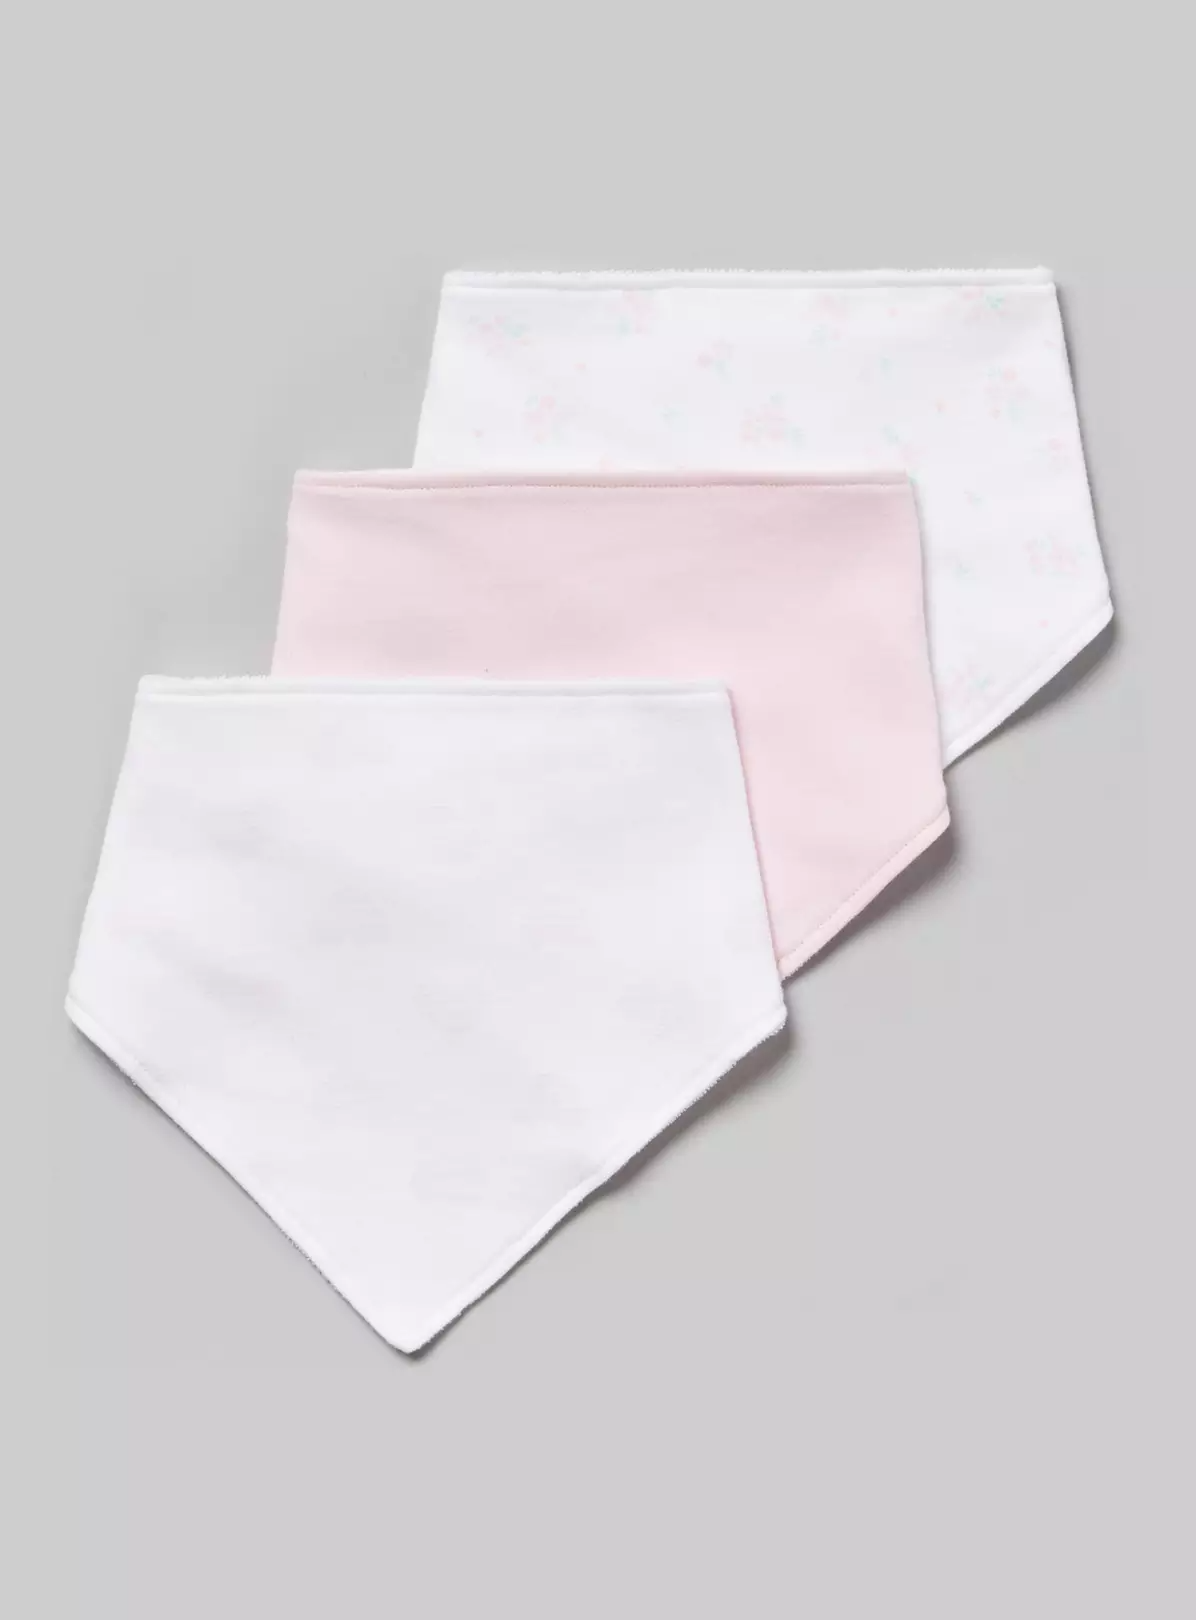 Pink & White Print Hanky Bibs 3 Pack – One Size